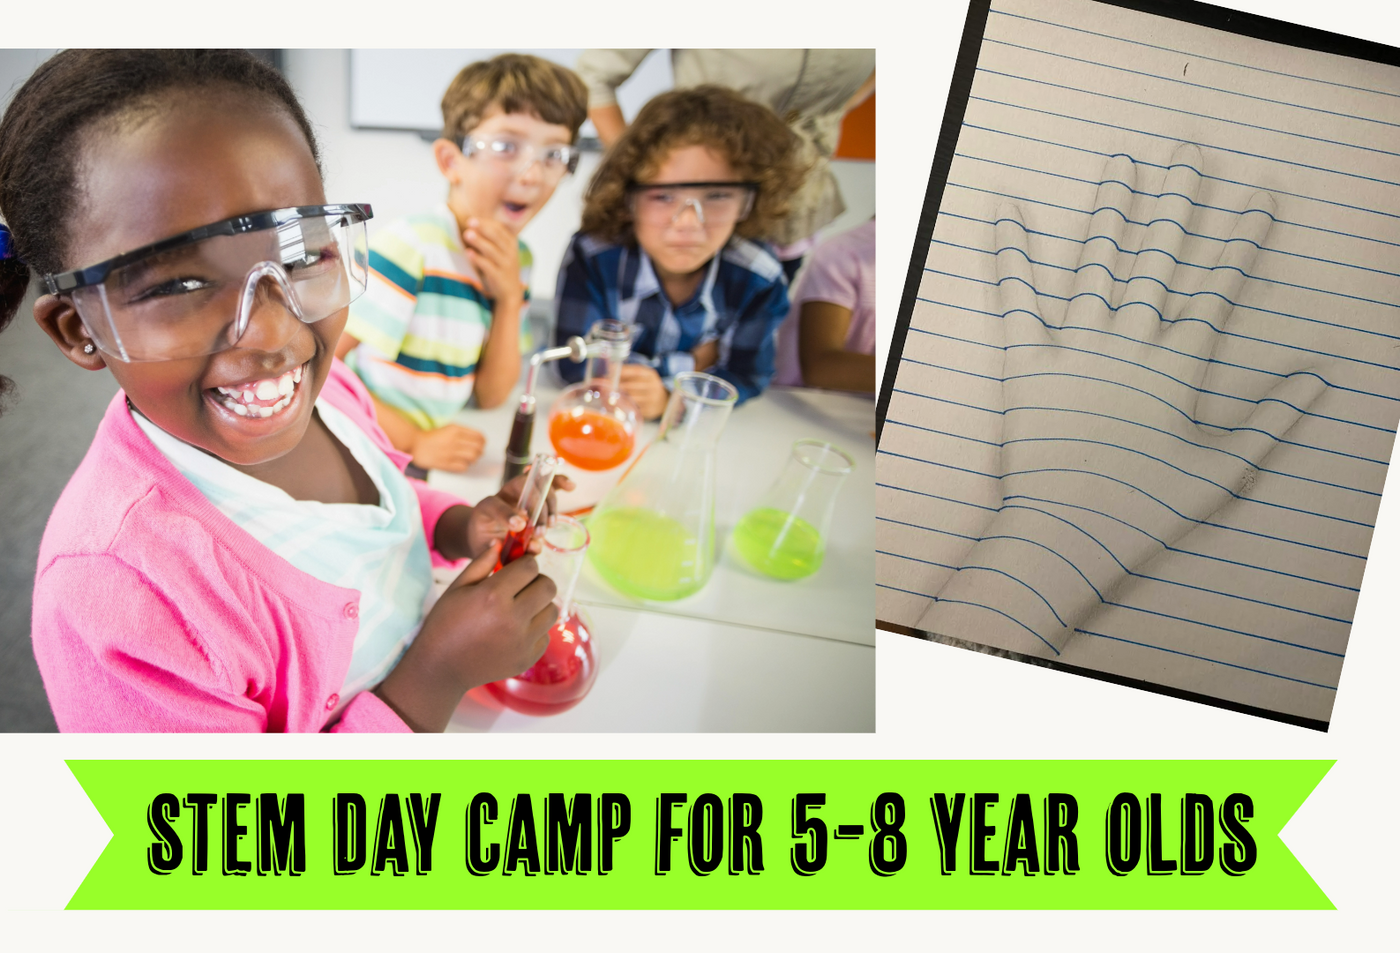 STEM Day Camp 7/15-7/19 for 5-8 Year Olds